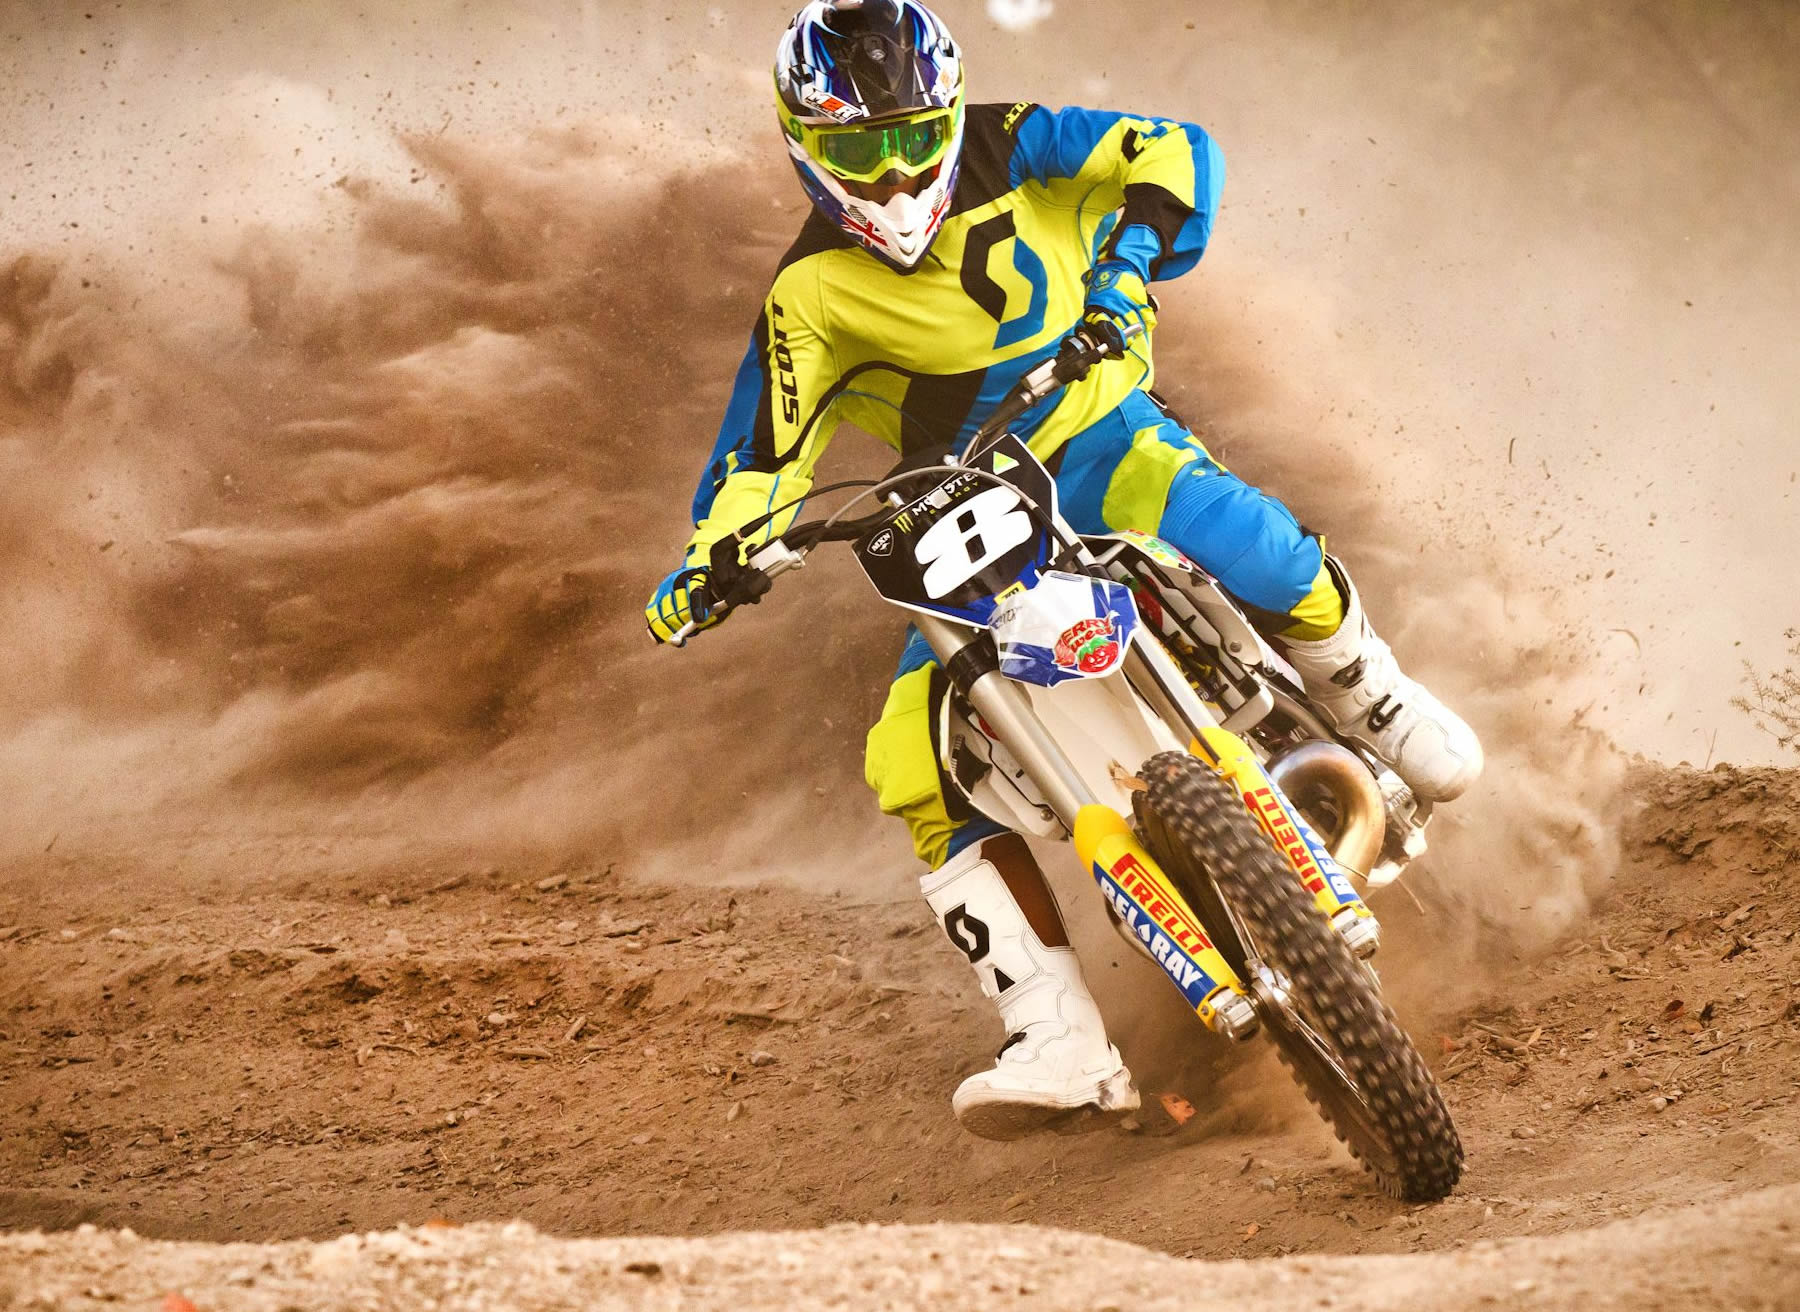 Husky MX Nats Team launched